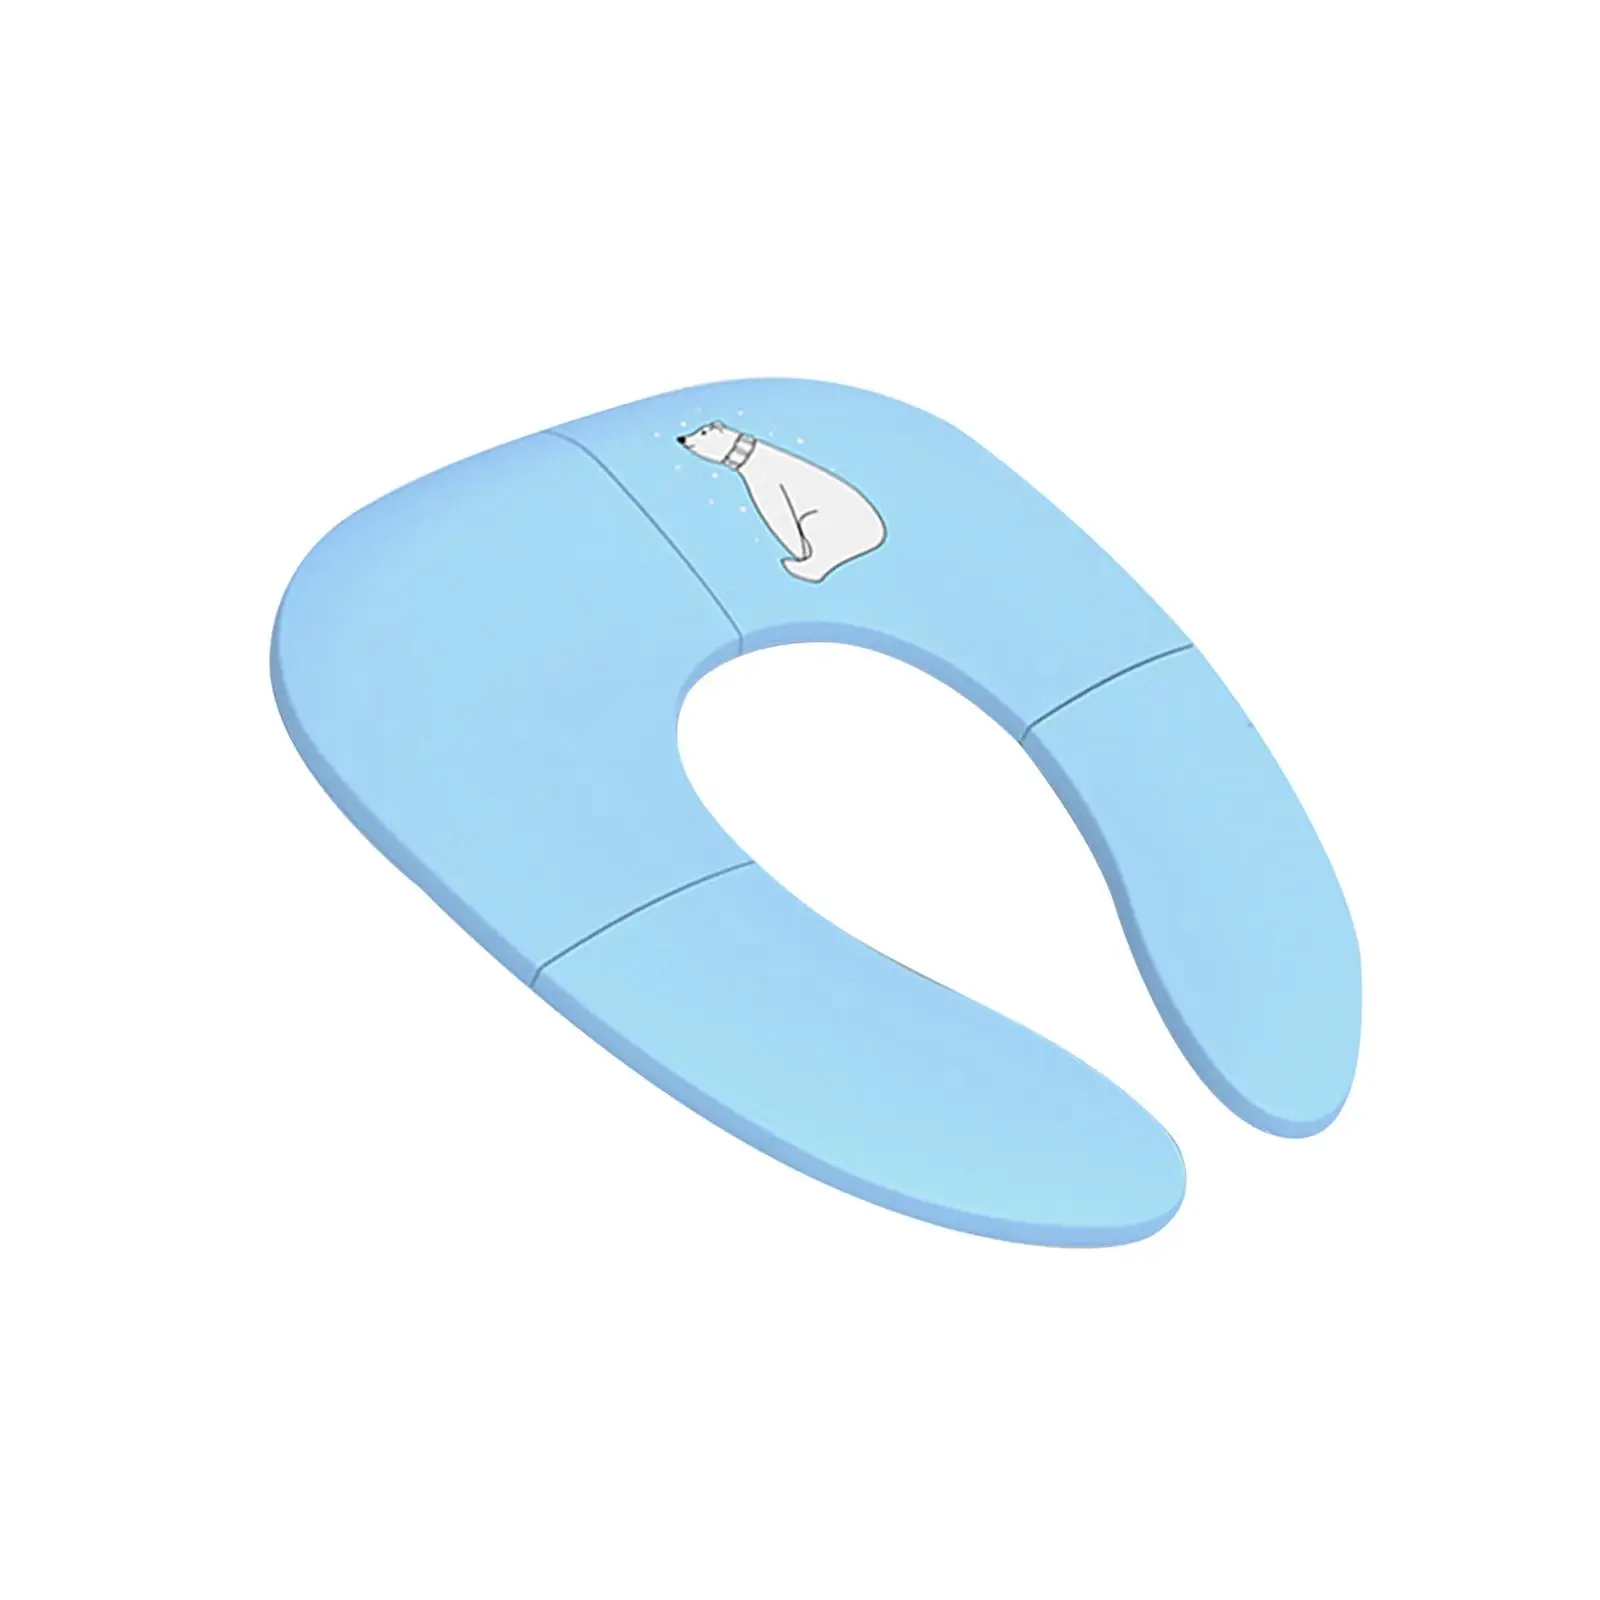 Toilet Seat pad Non Slip Portable for Round and Oval Toilets Girls Toddler